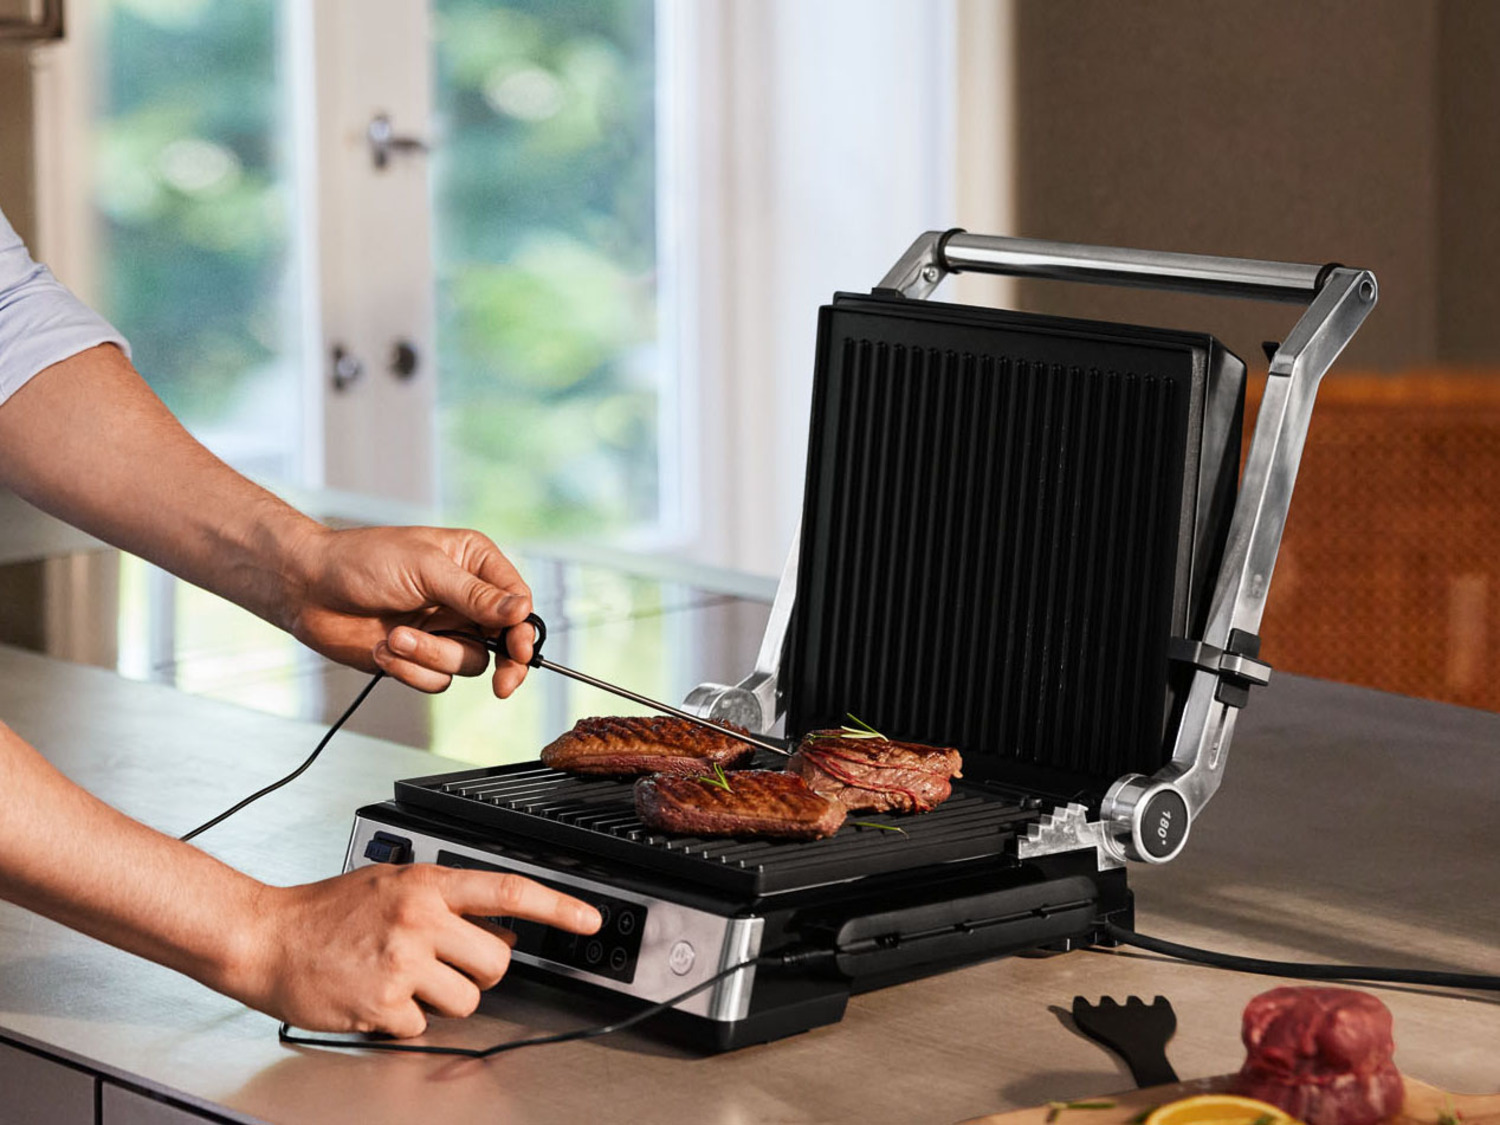 Contactgrill online | LIDL